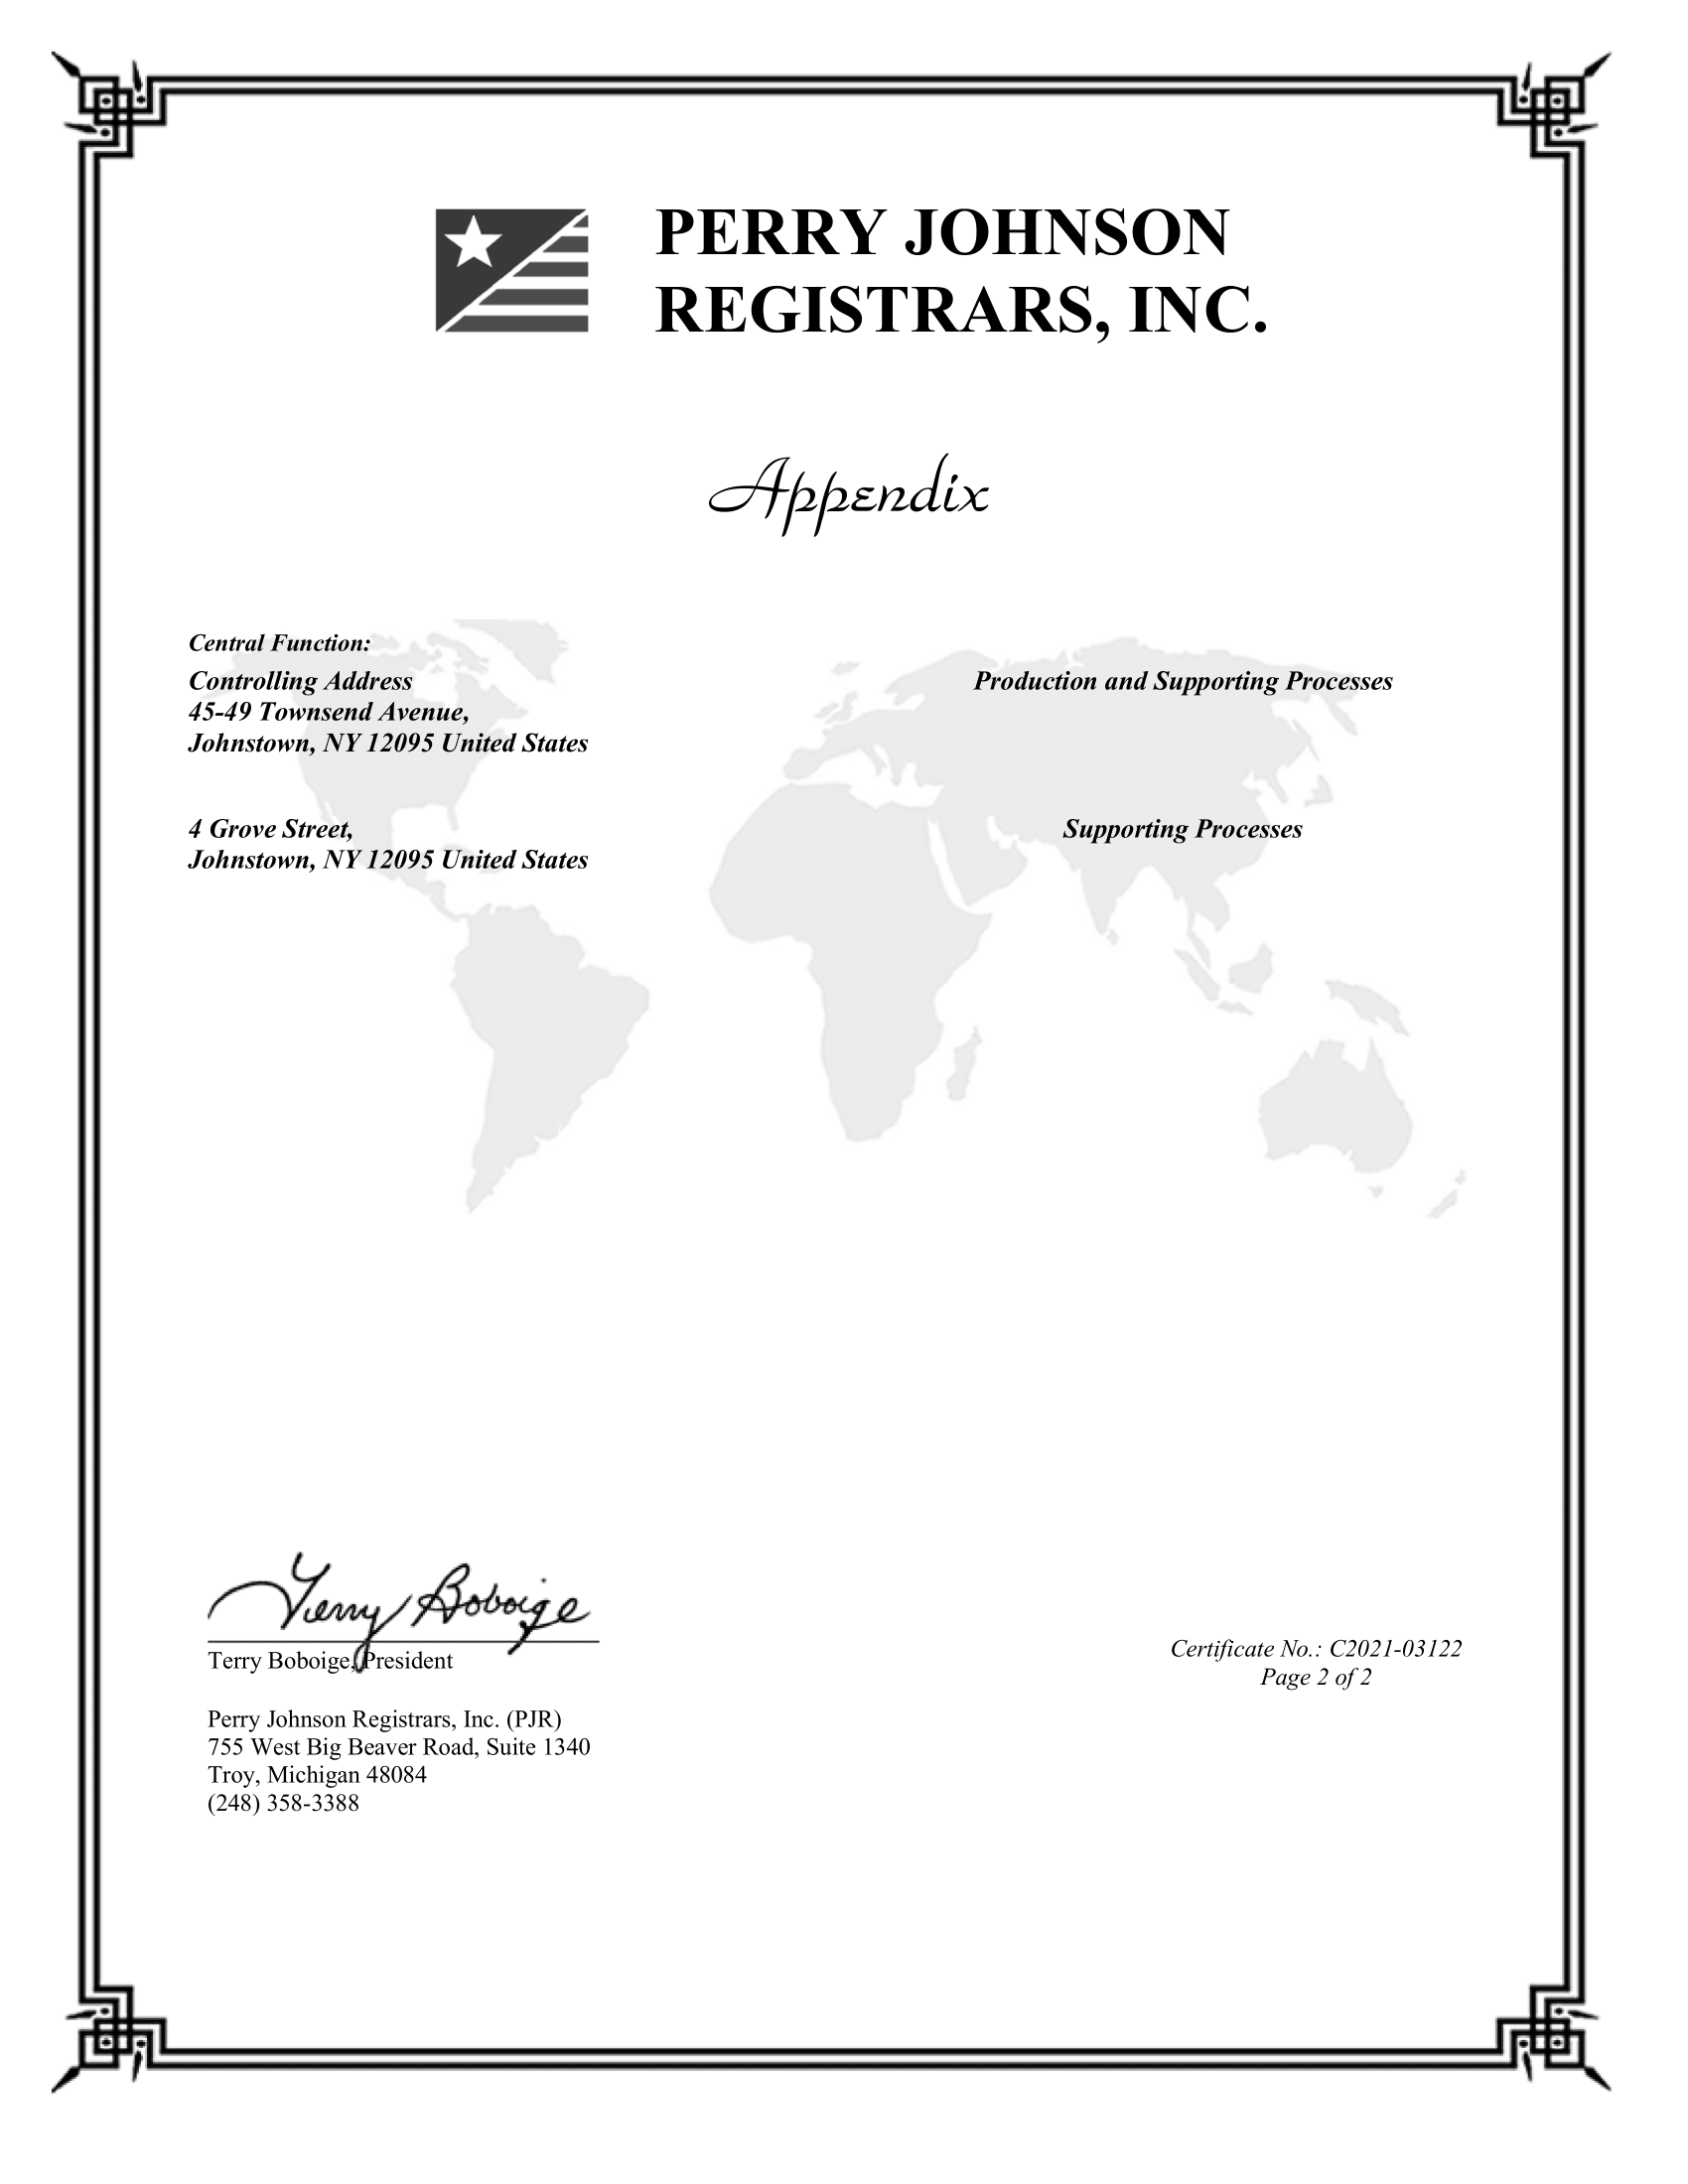 ISO AS9100 Certificate